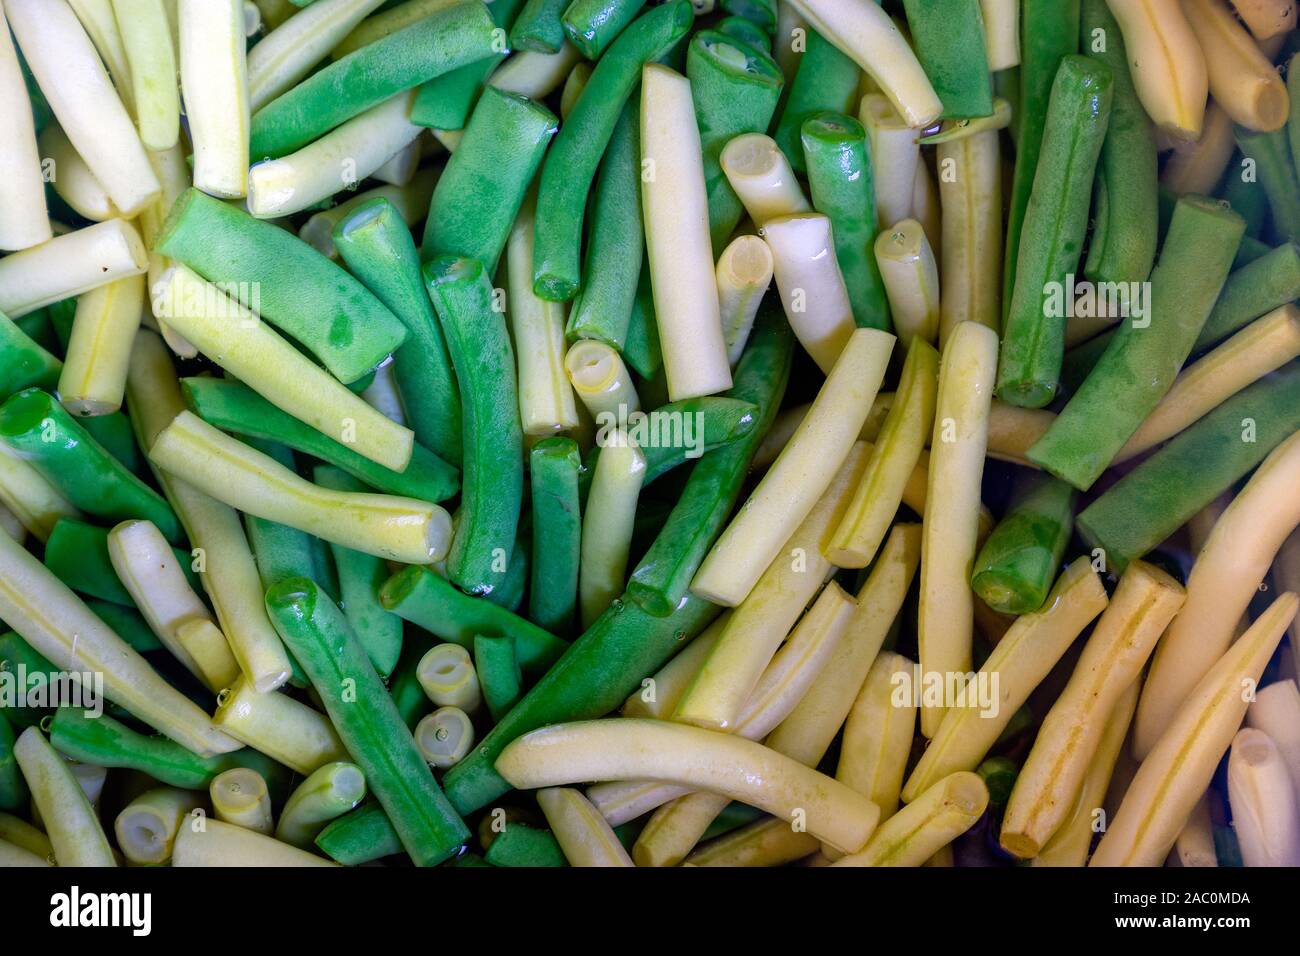 Sliced green and yellow bean are boiled in water in a saucepan. Close-up view Stock Photo